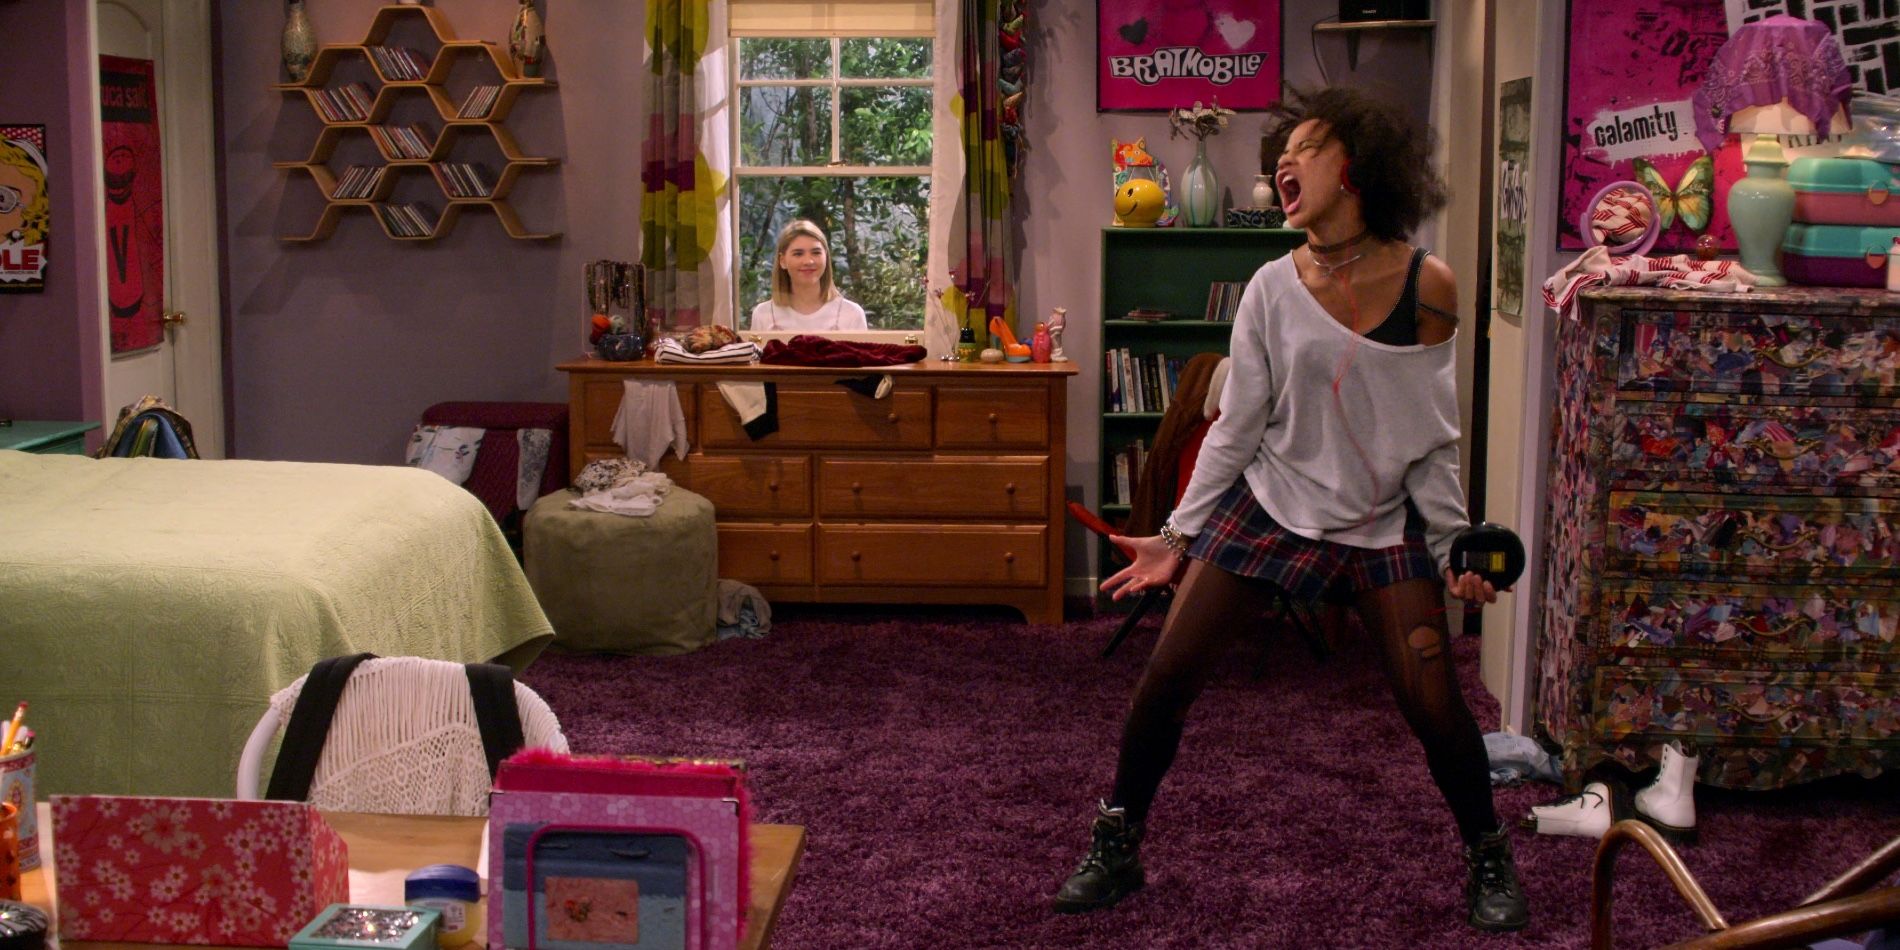 Gwen Runck dancing in Donna's old bedroom while Leia Forman looks in the window in That '90s Show